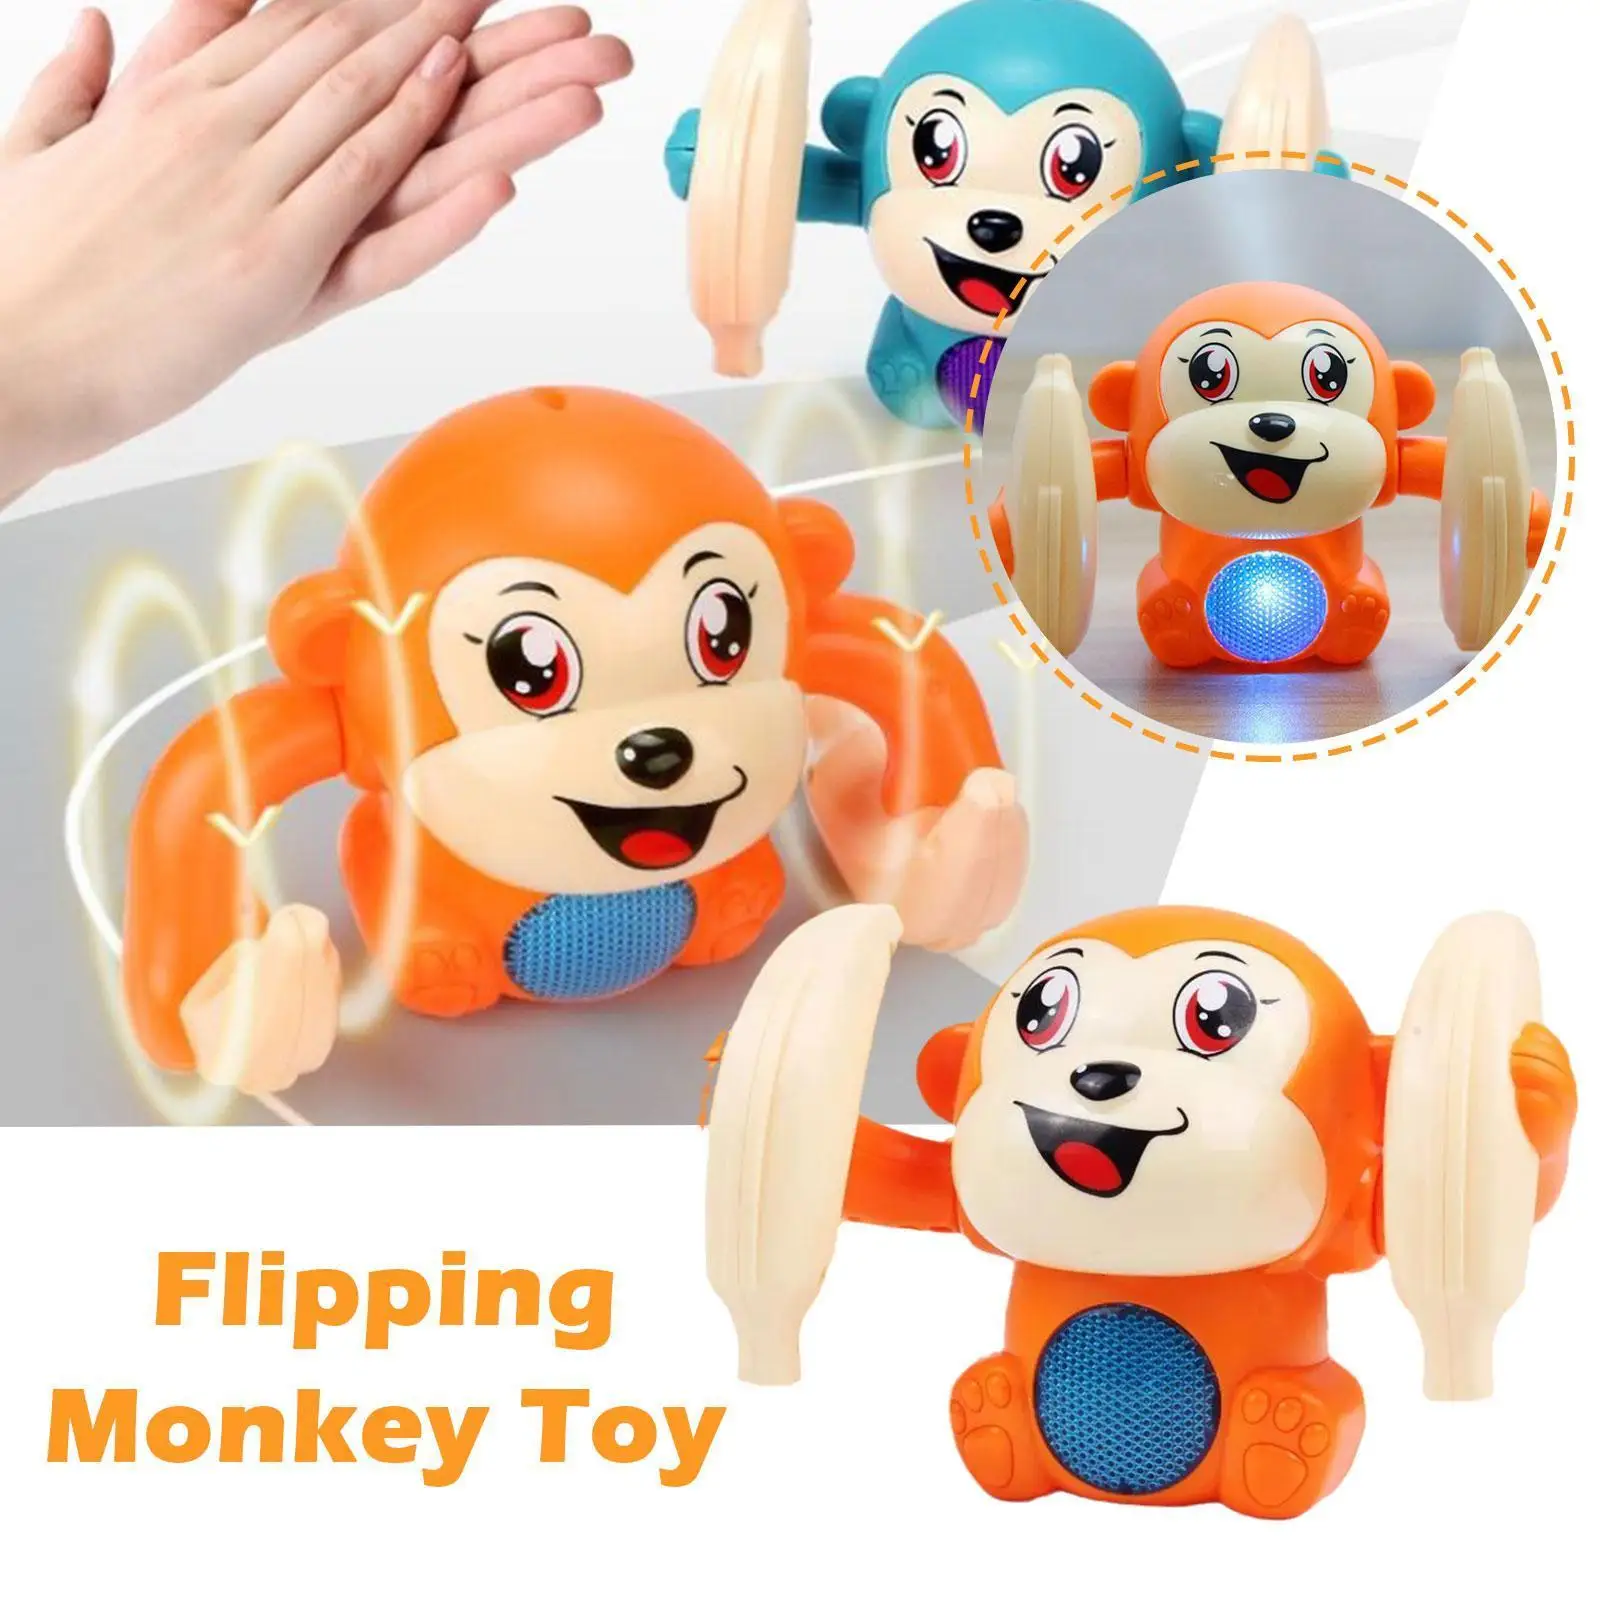 

Monkey Toy Creative Safe Lovely Electric Flipping Dancing Monkey Toy For Infant Rolling Animal Toy Flipping Toy P9T5